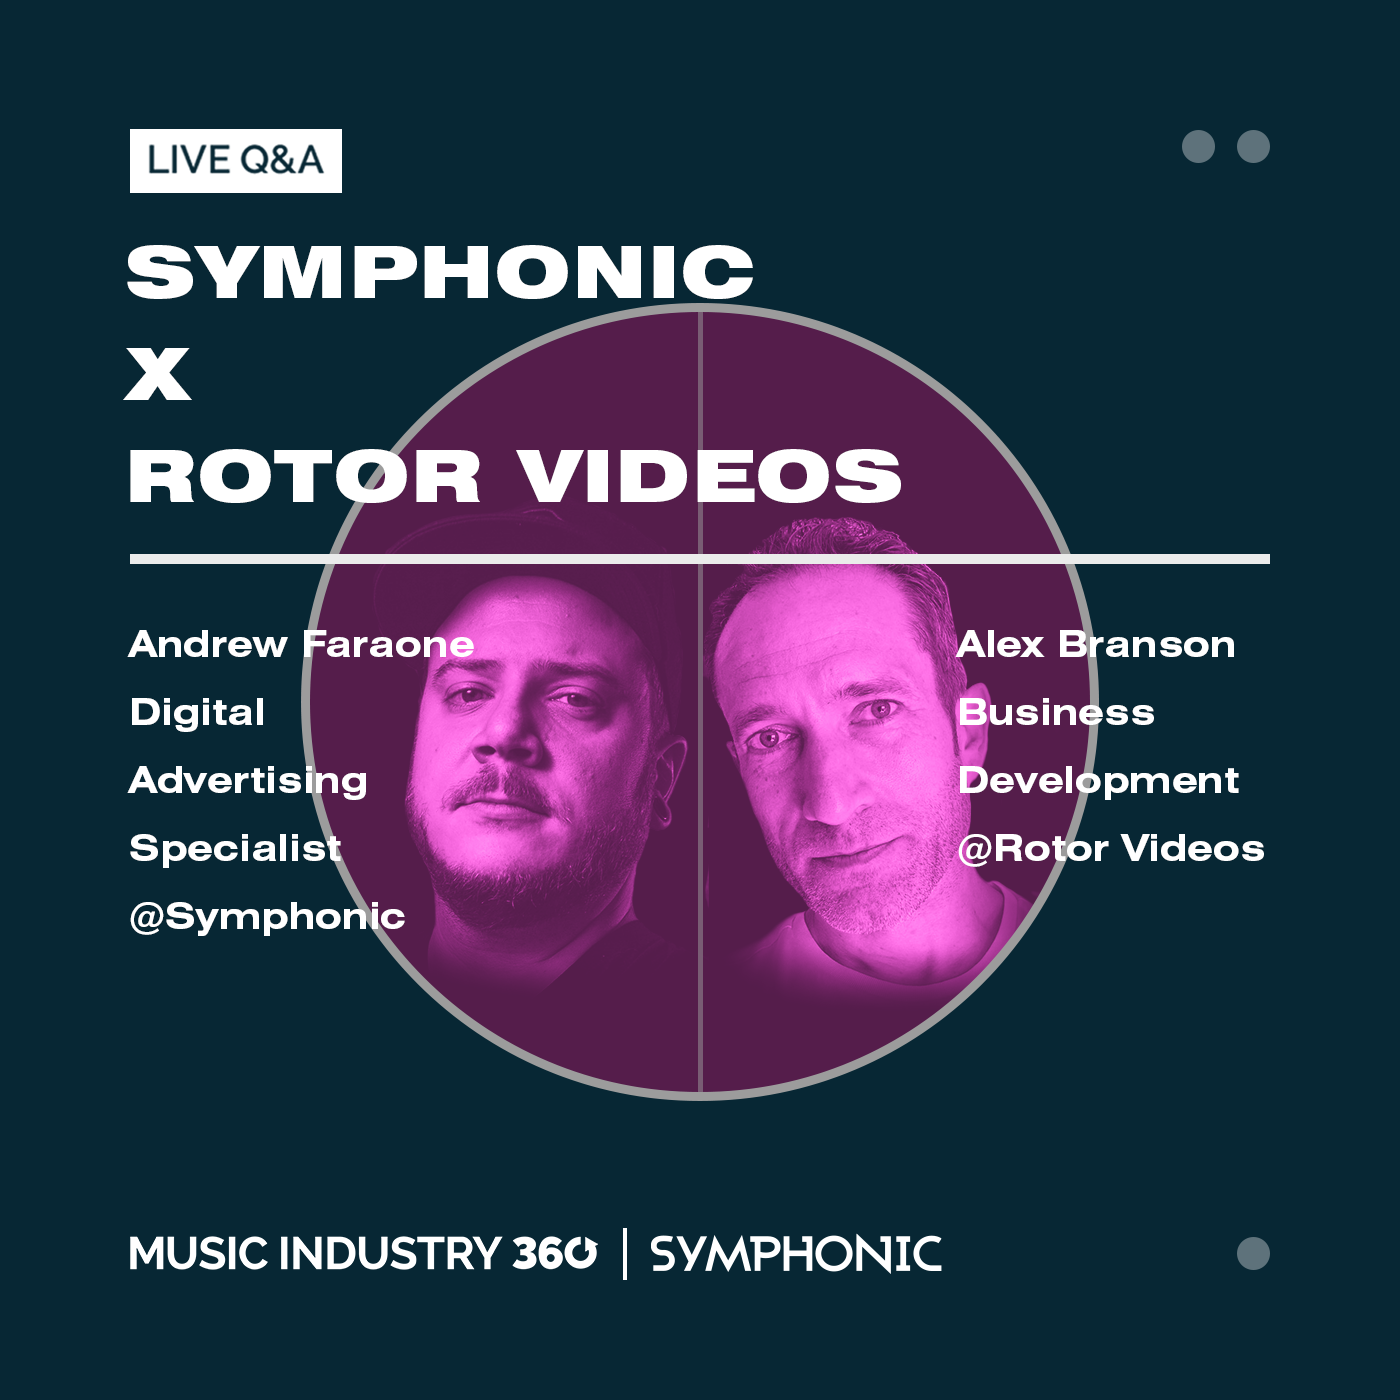 Symphonic x Rotor Videos Live Q&A: How to Create a Video For My Next Release? | Music Industry 360 Podcast